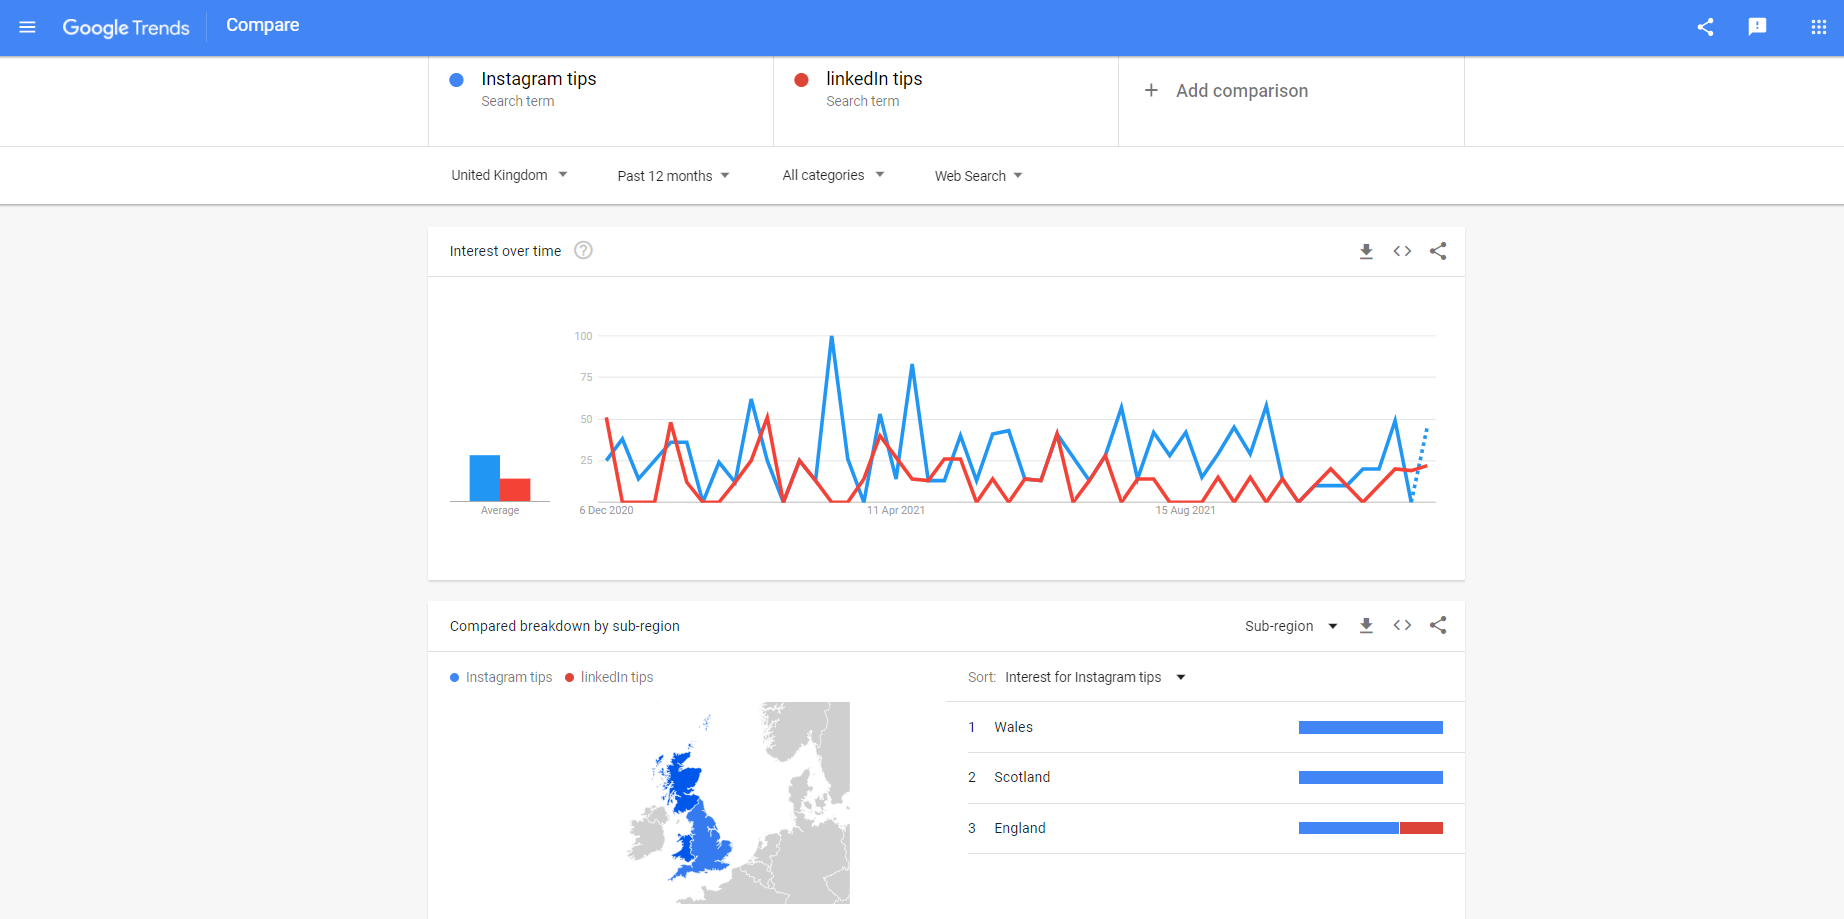 Google Trends showing the searches for the phrase "Instagram Tips" vs "LinkedIn Tips" over the last month.